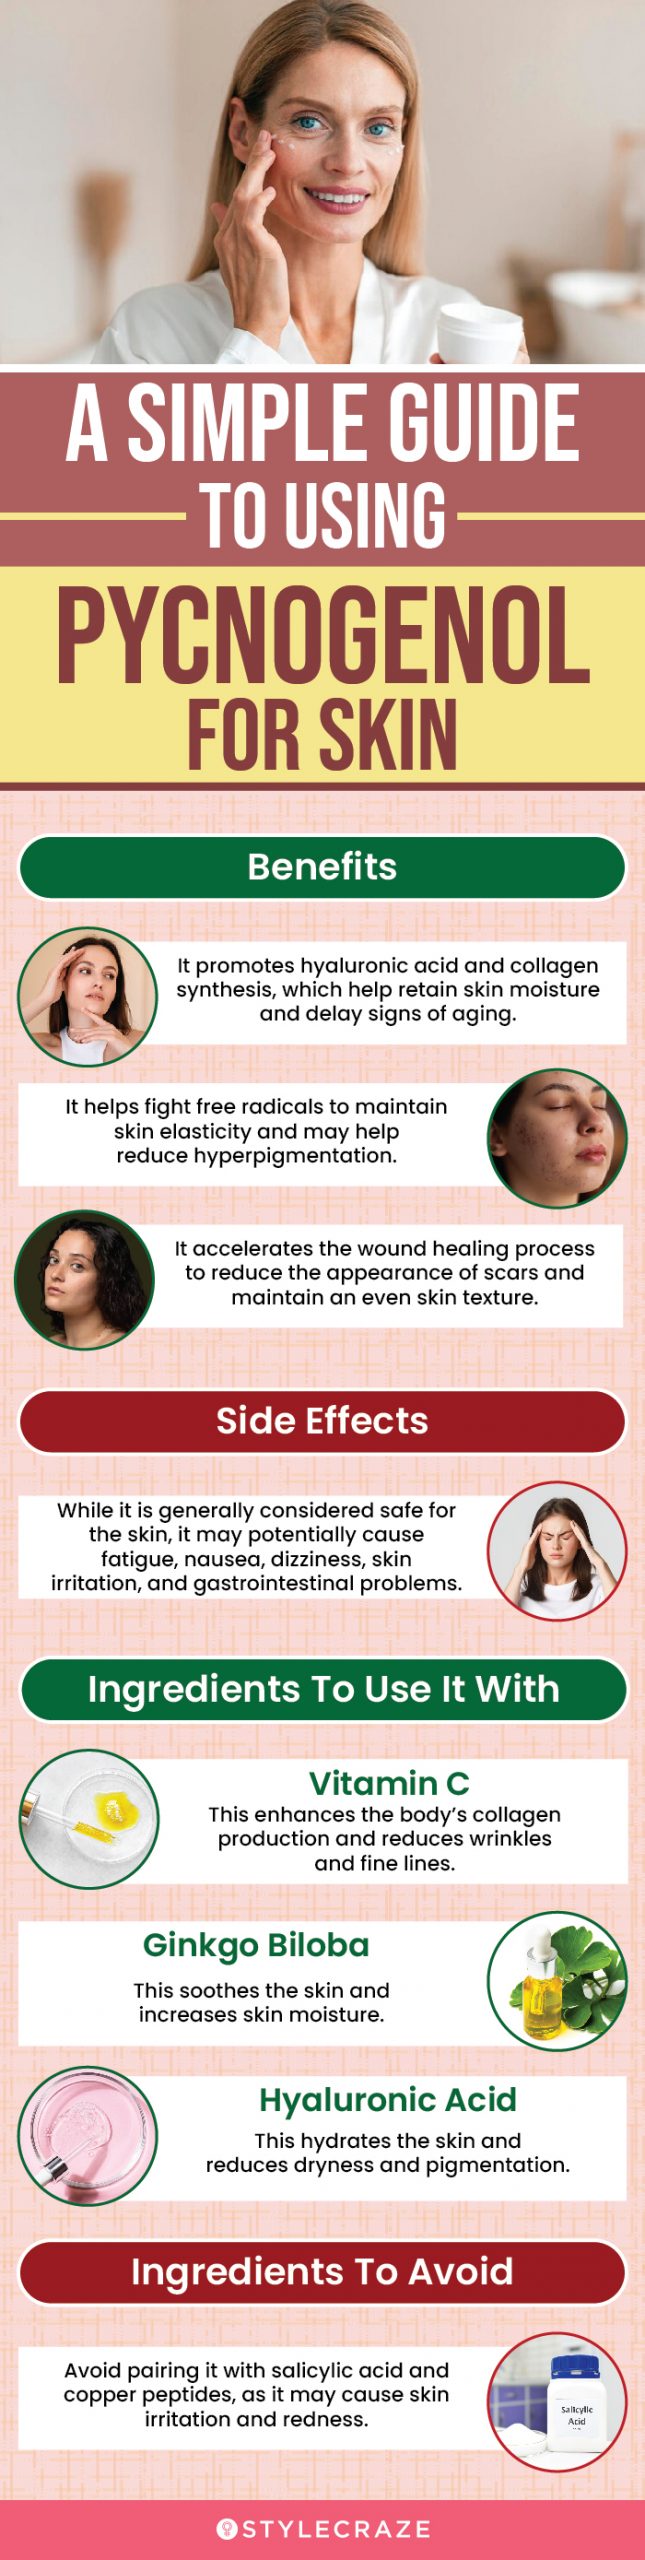 a simple guide to using pycnogenol for skin (infographic)